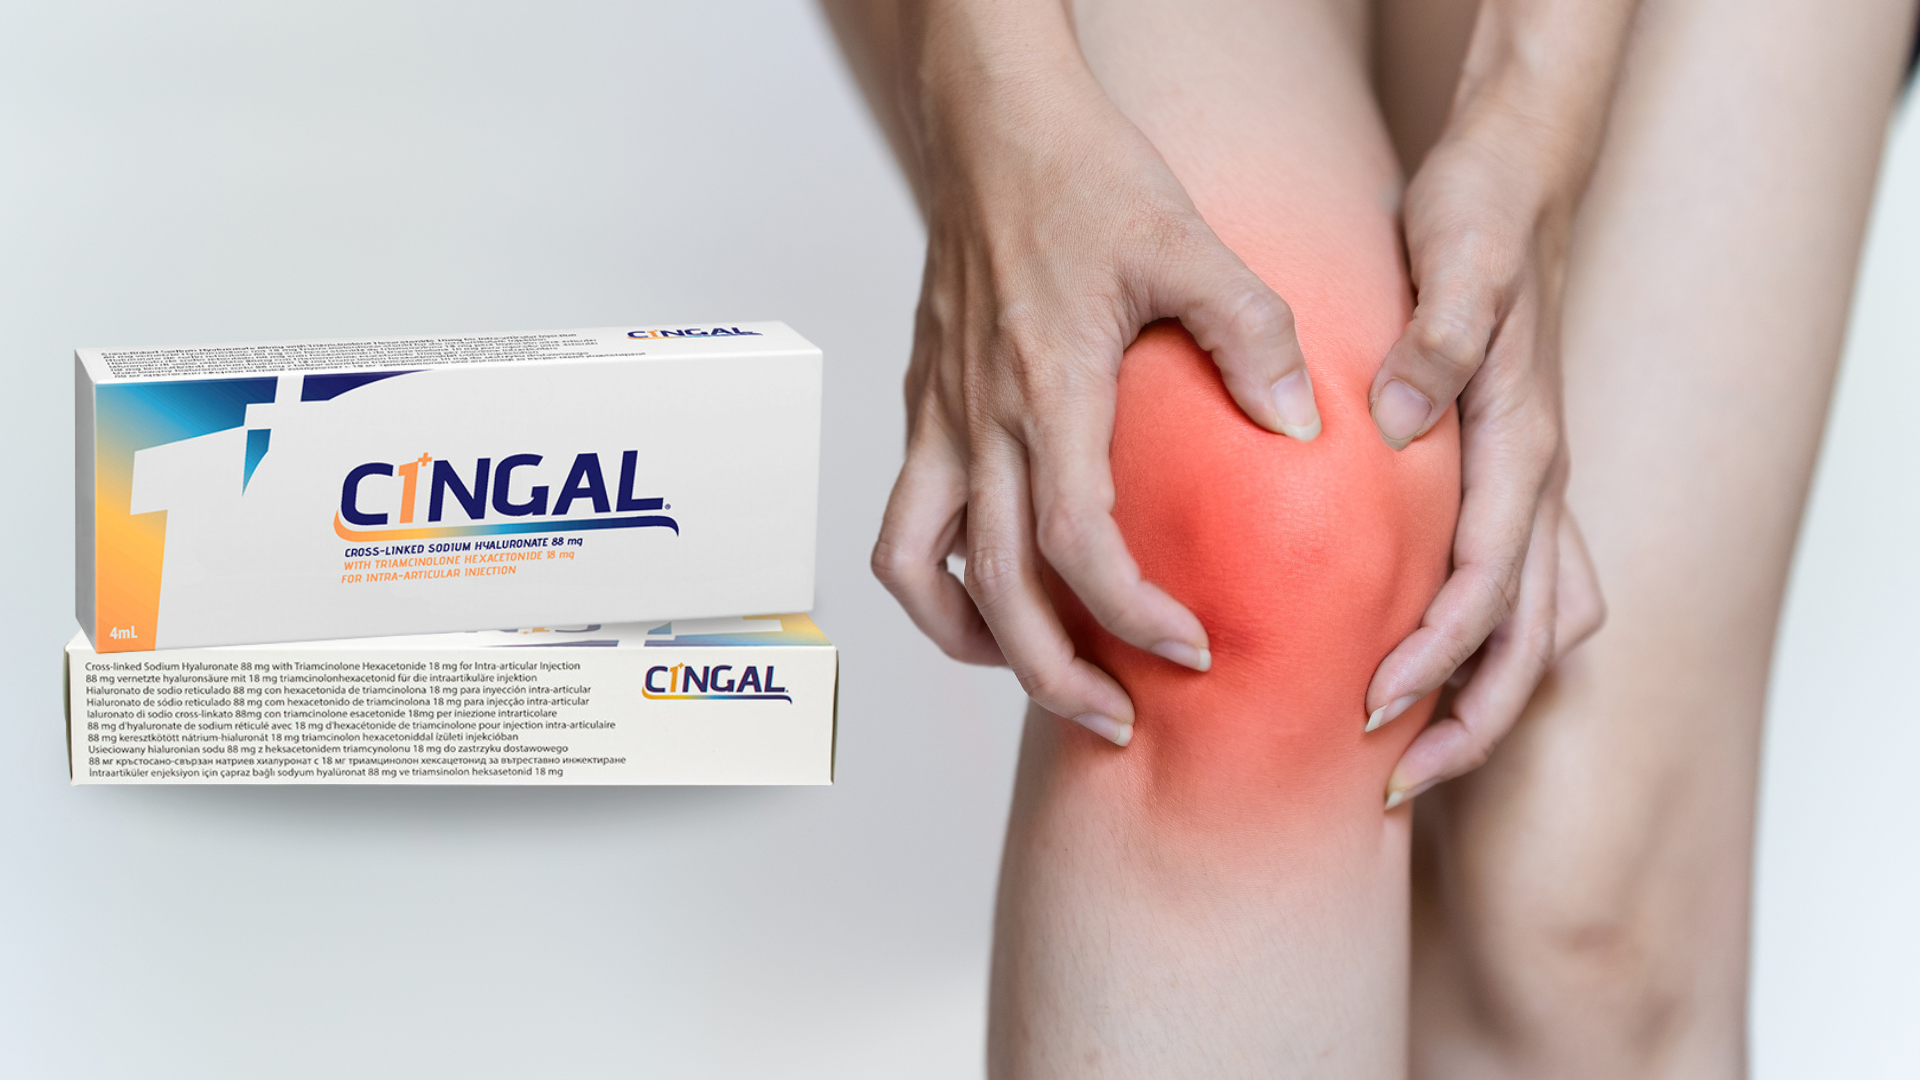 Cingal injections address knee pain.